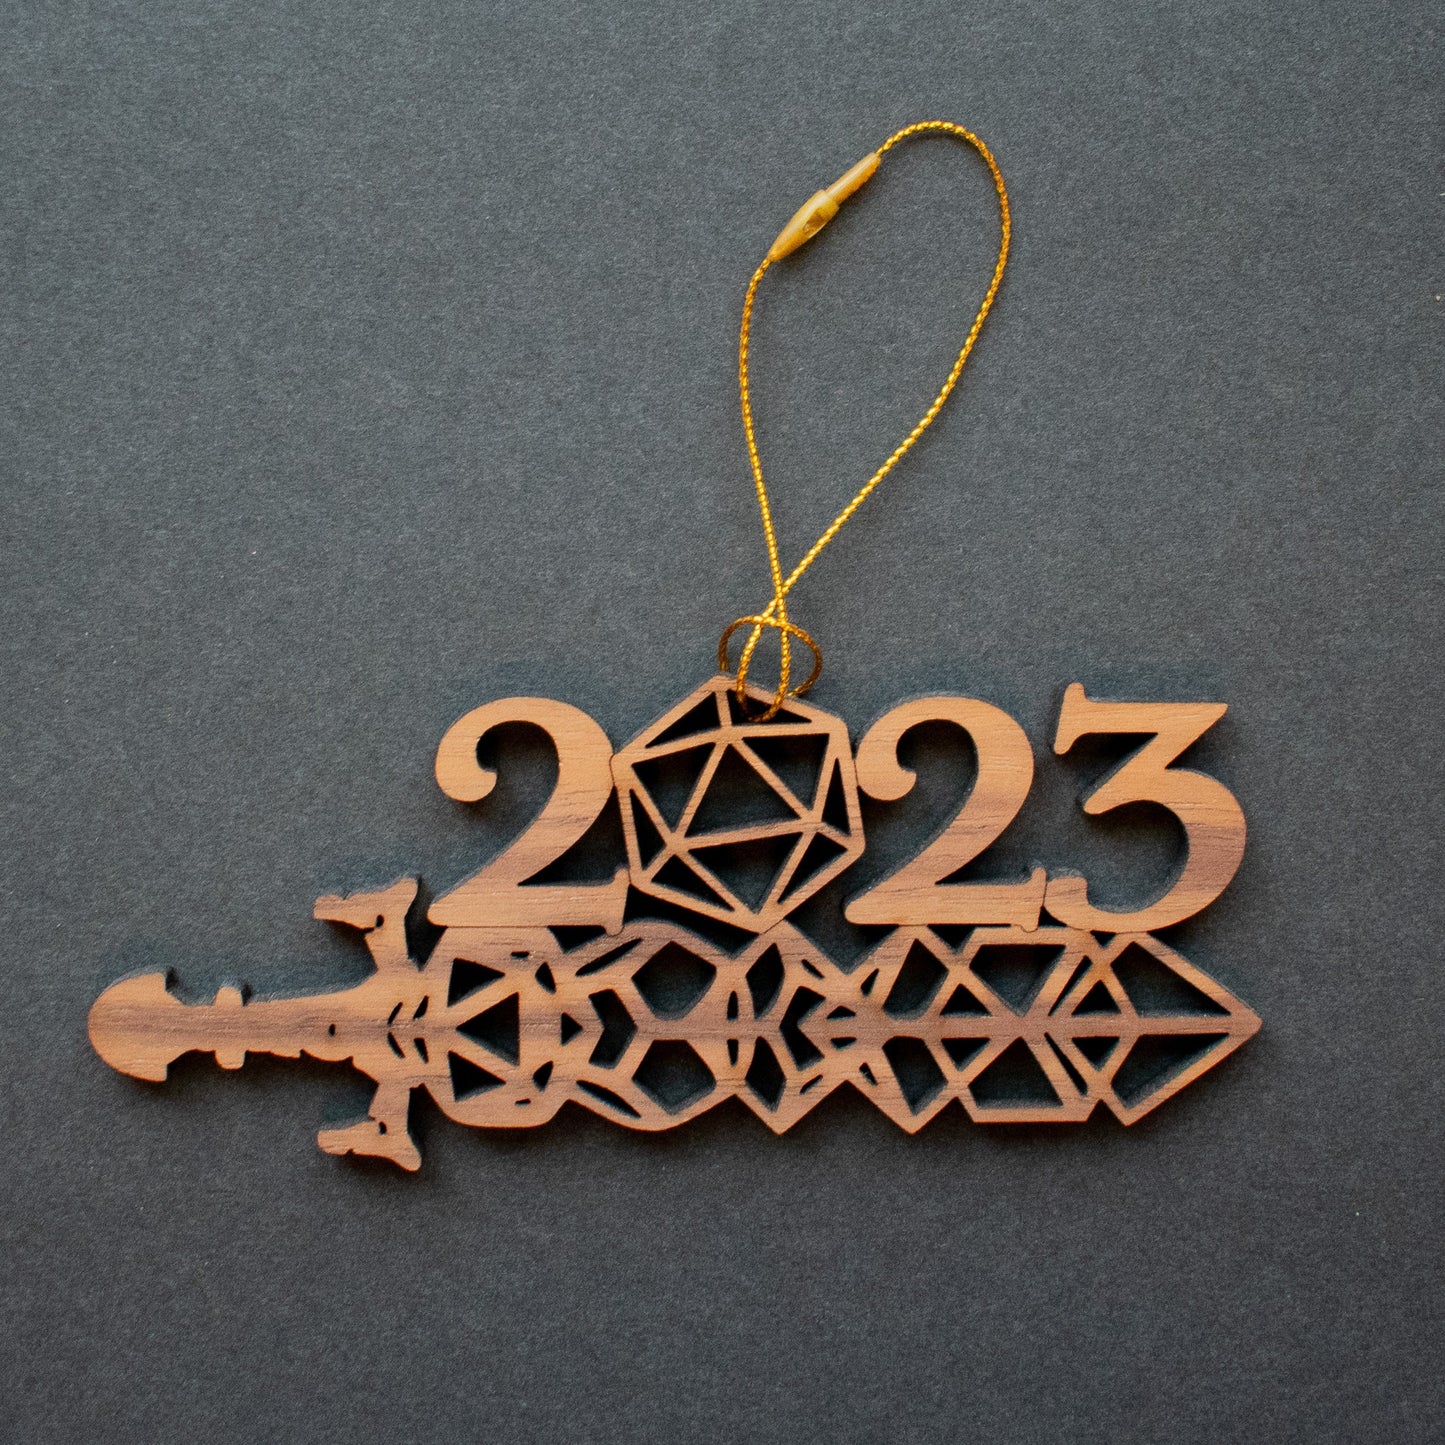 D&D Ornament, DnD Gift Tag, Dungeons and Dragons Gift Idea, 2023 DnD Christmas Ornament, 2023 Ornament, 2023 Tree Ornament